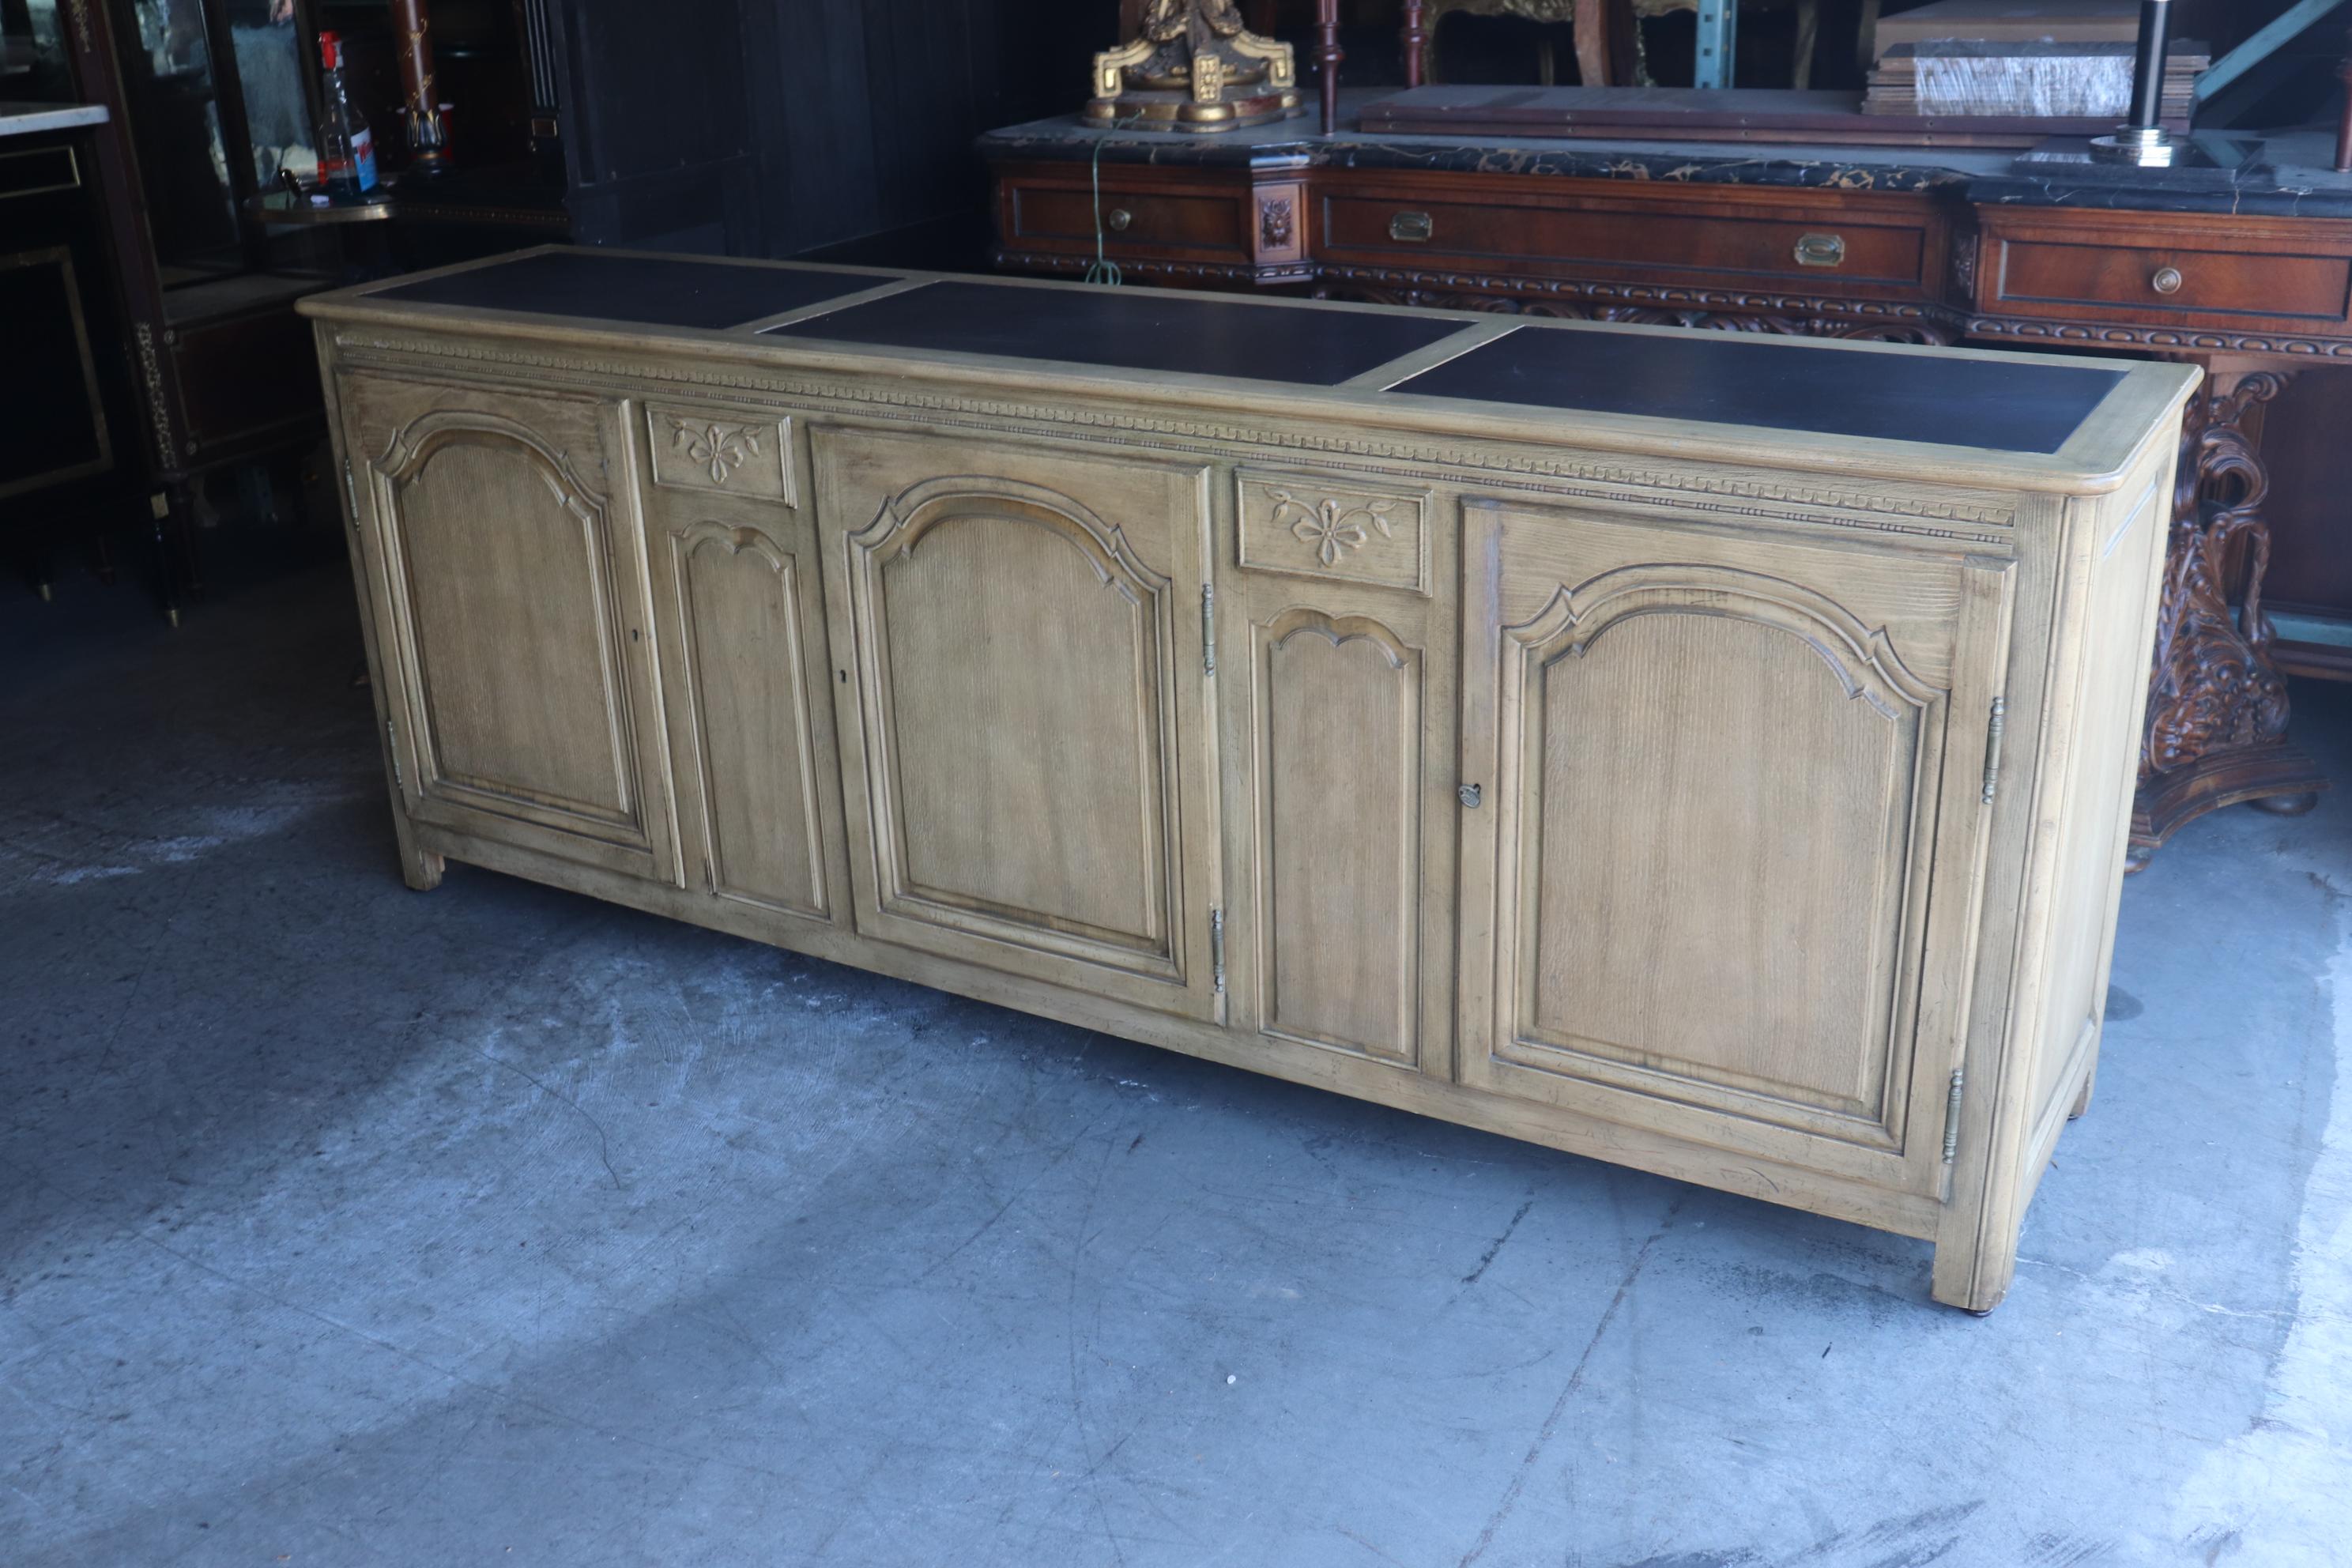 This is a gorgeous French country sideboard by Baker furniture company that is meant to conjure the feelings of being in the southern part of the French countryside where furniture like this was in every home. This grand sideboard has slate inserts